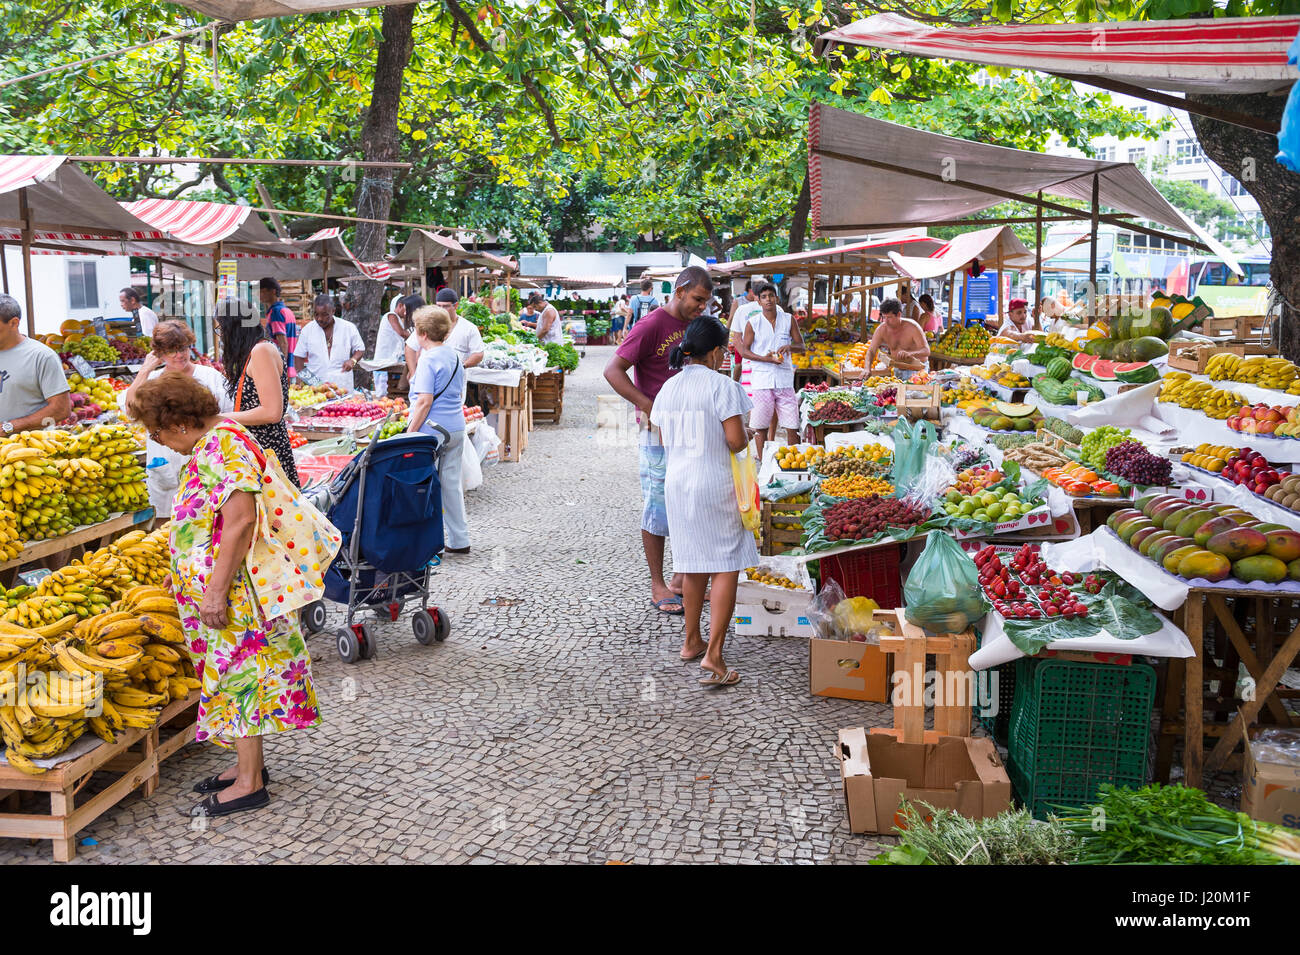 RIO DE JANEIRO - JANUARY 31, 2017: Customers browse the colorful fruit stalls of the weekly farmers market at General Osorio Plaza in Ipanema. Stock Photo